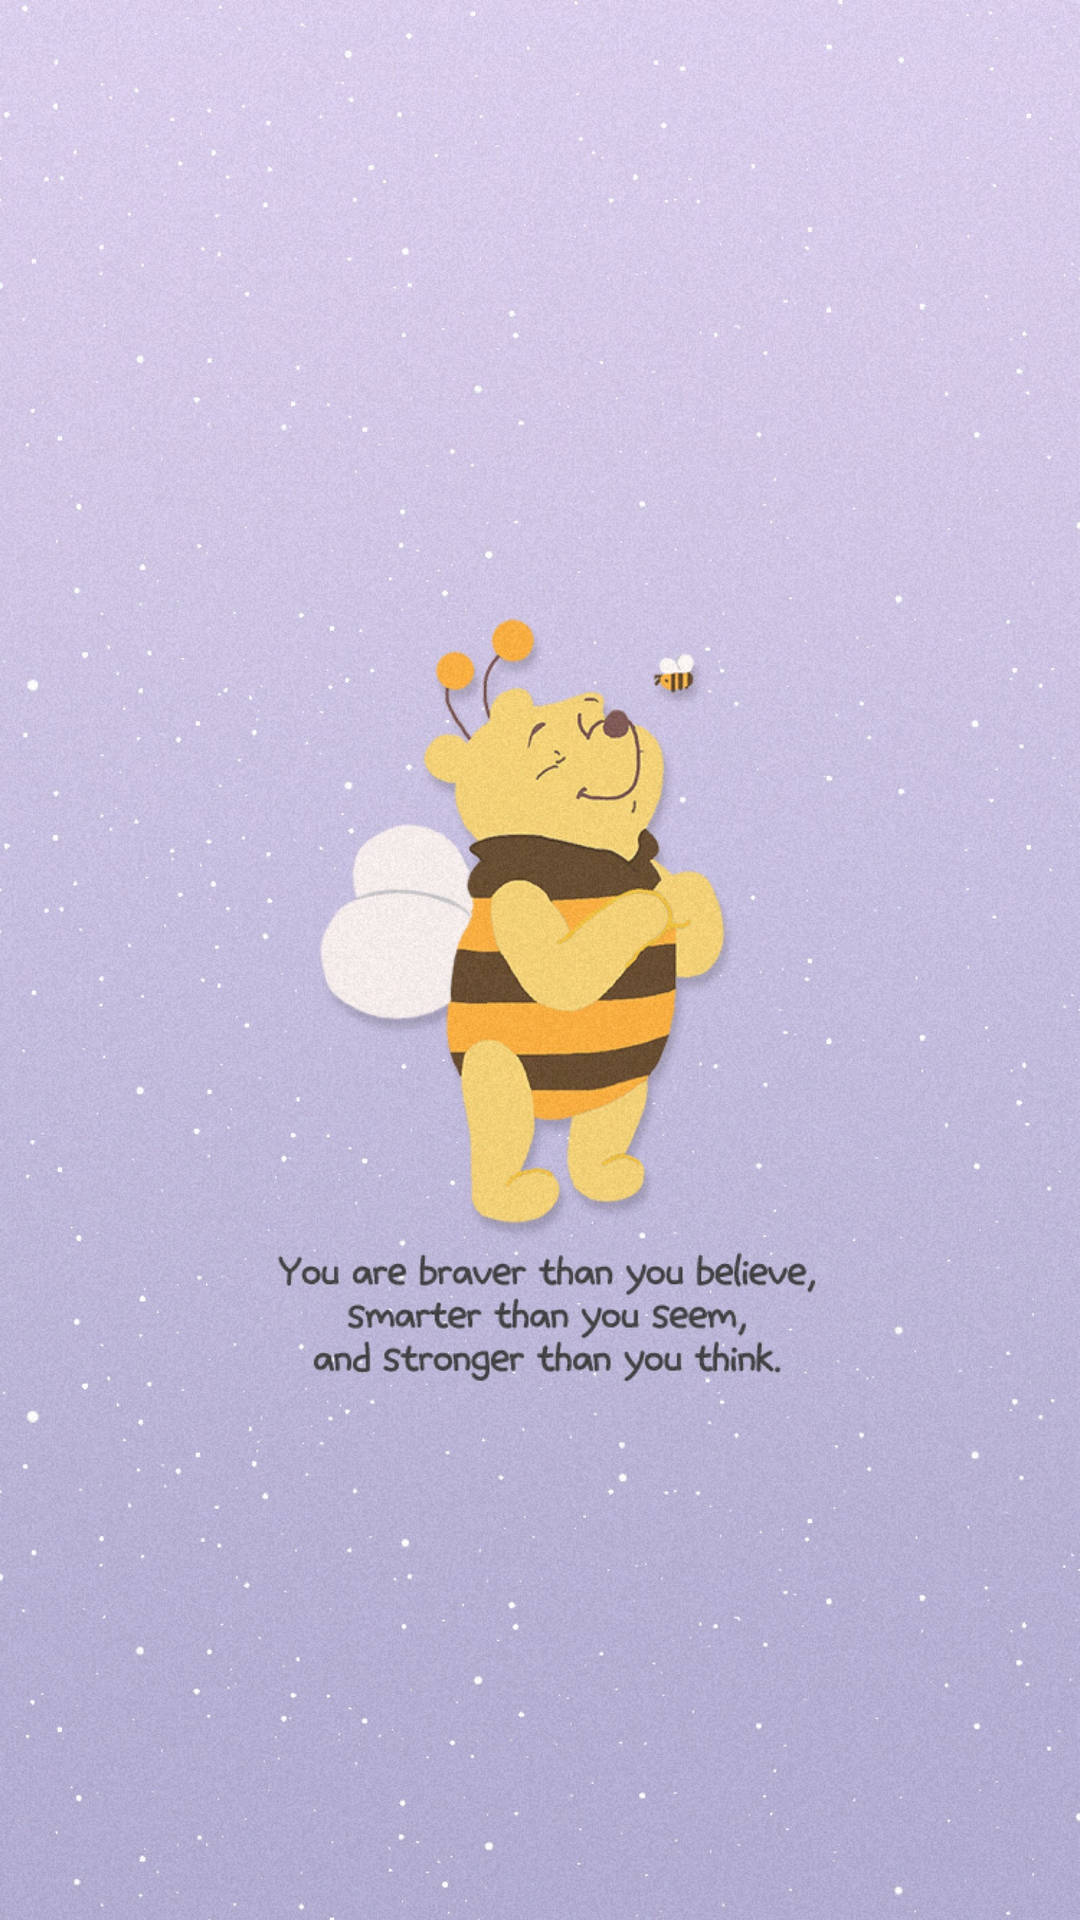 Download Winnie The Pooh In Bee Costume Wallpaper